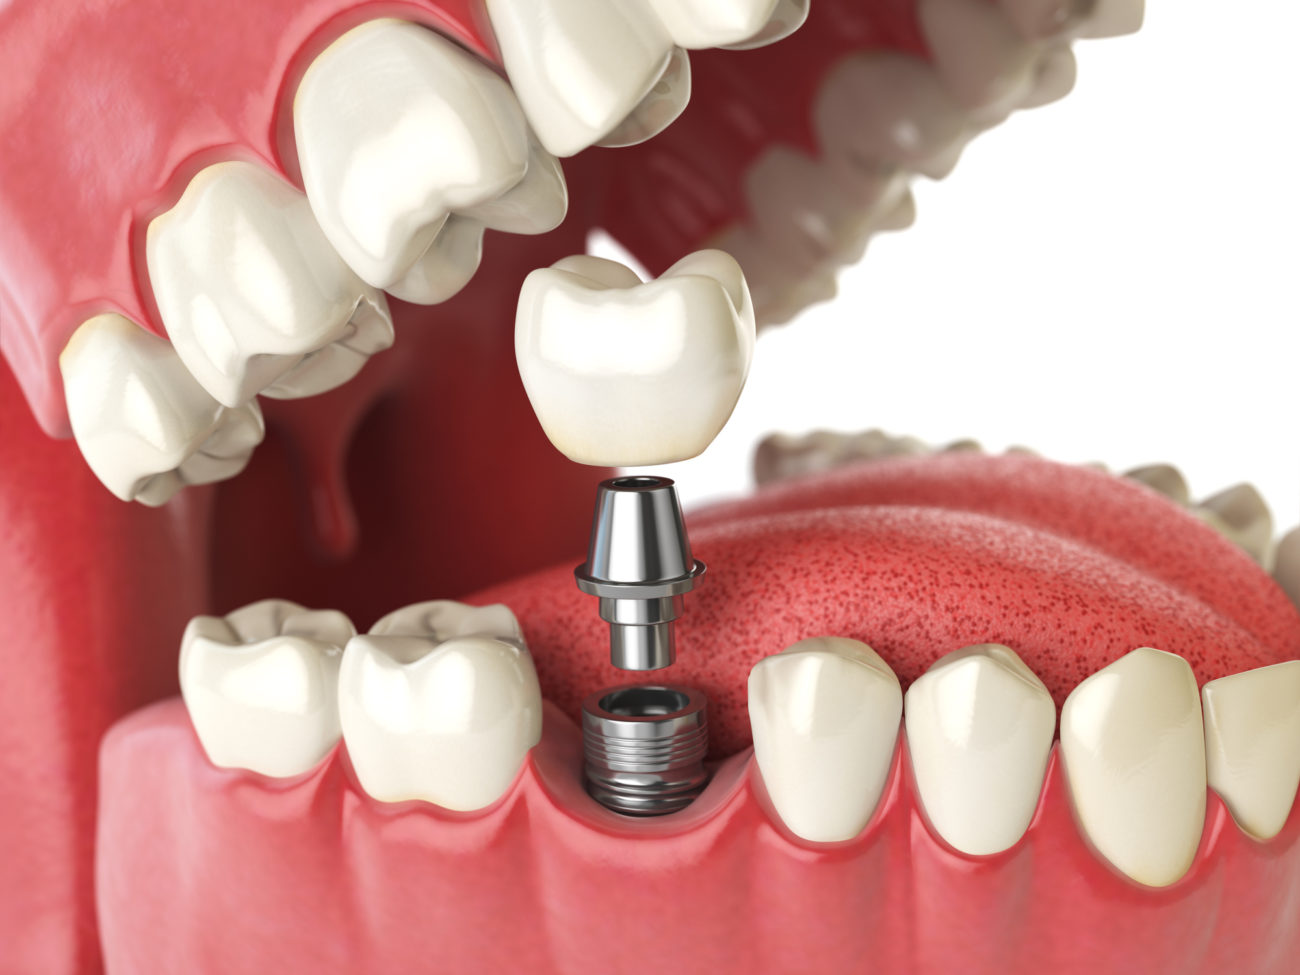 mouth with a single tooth implant